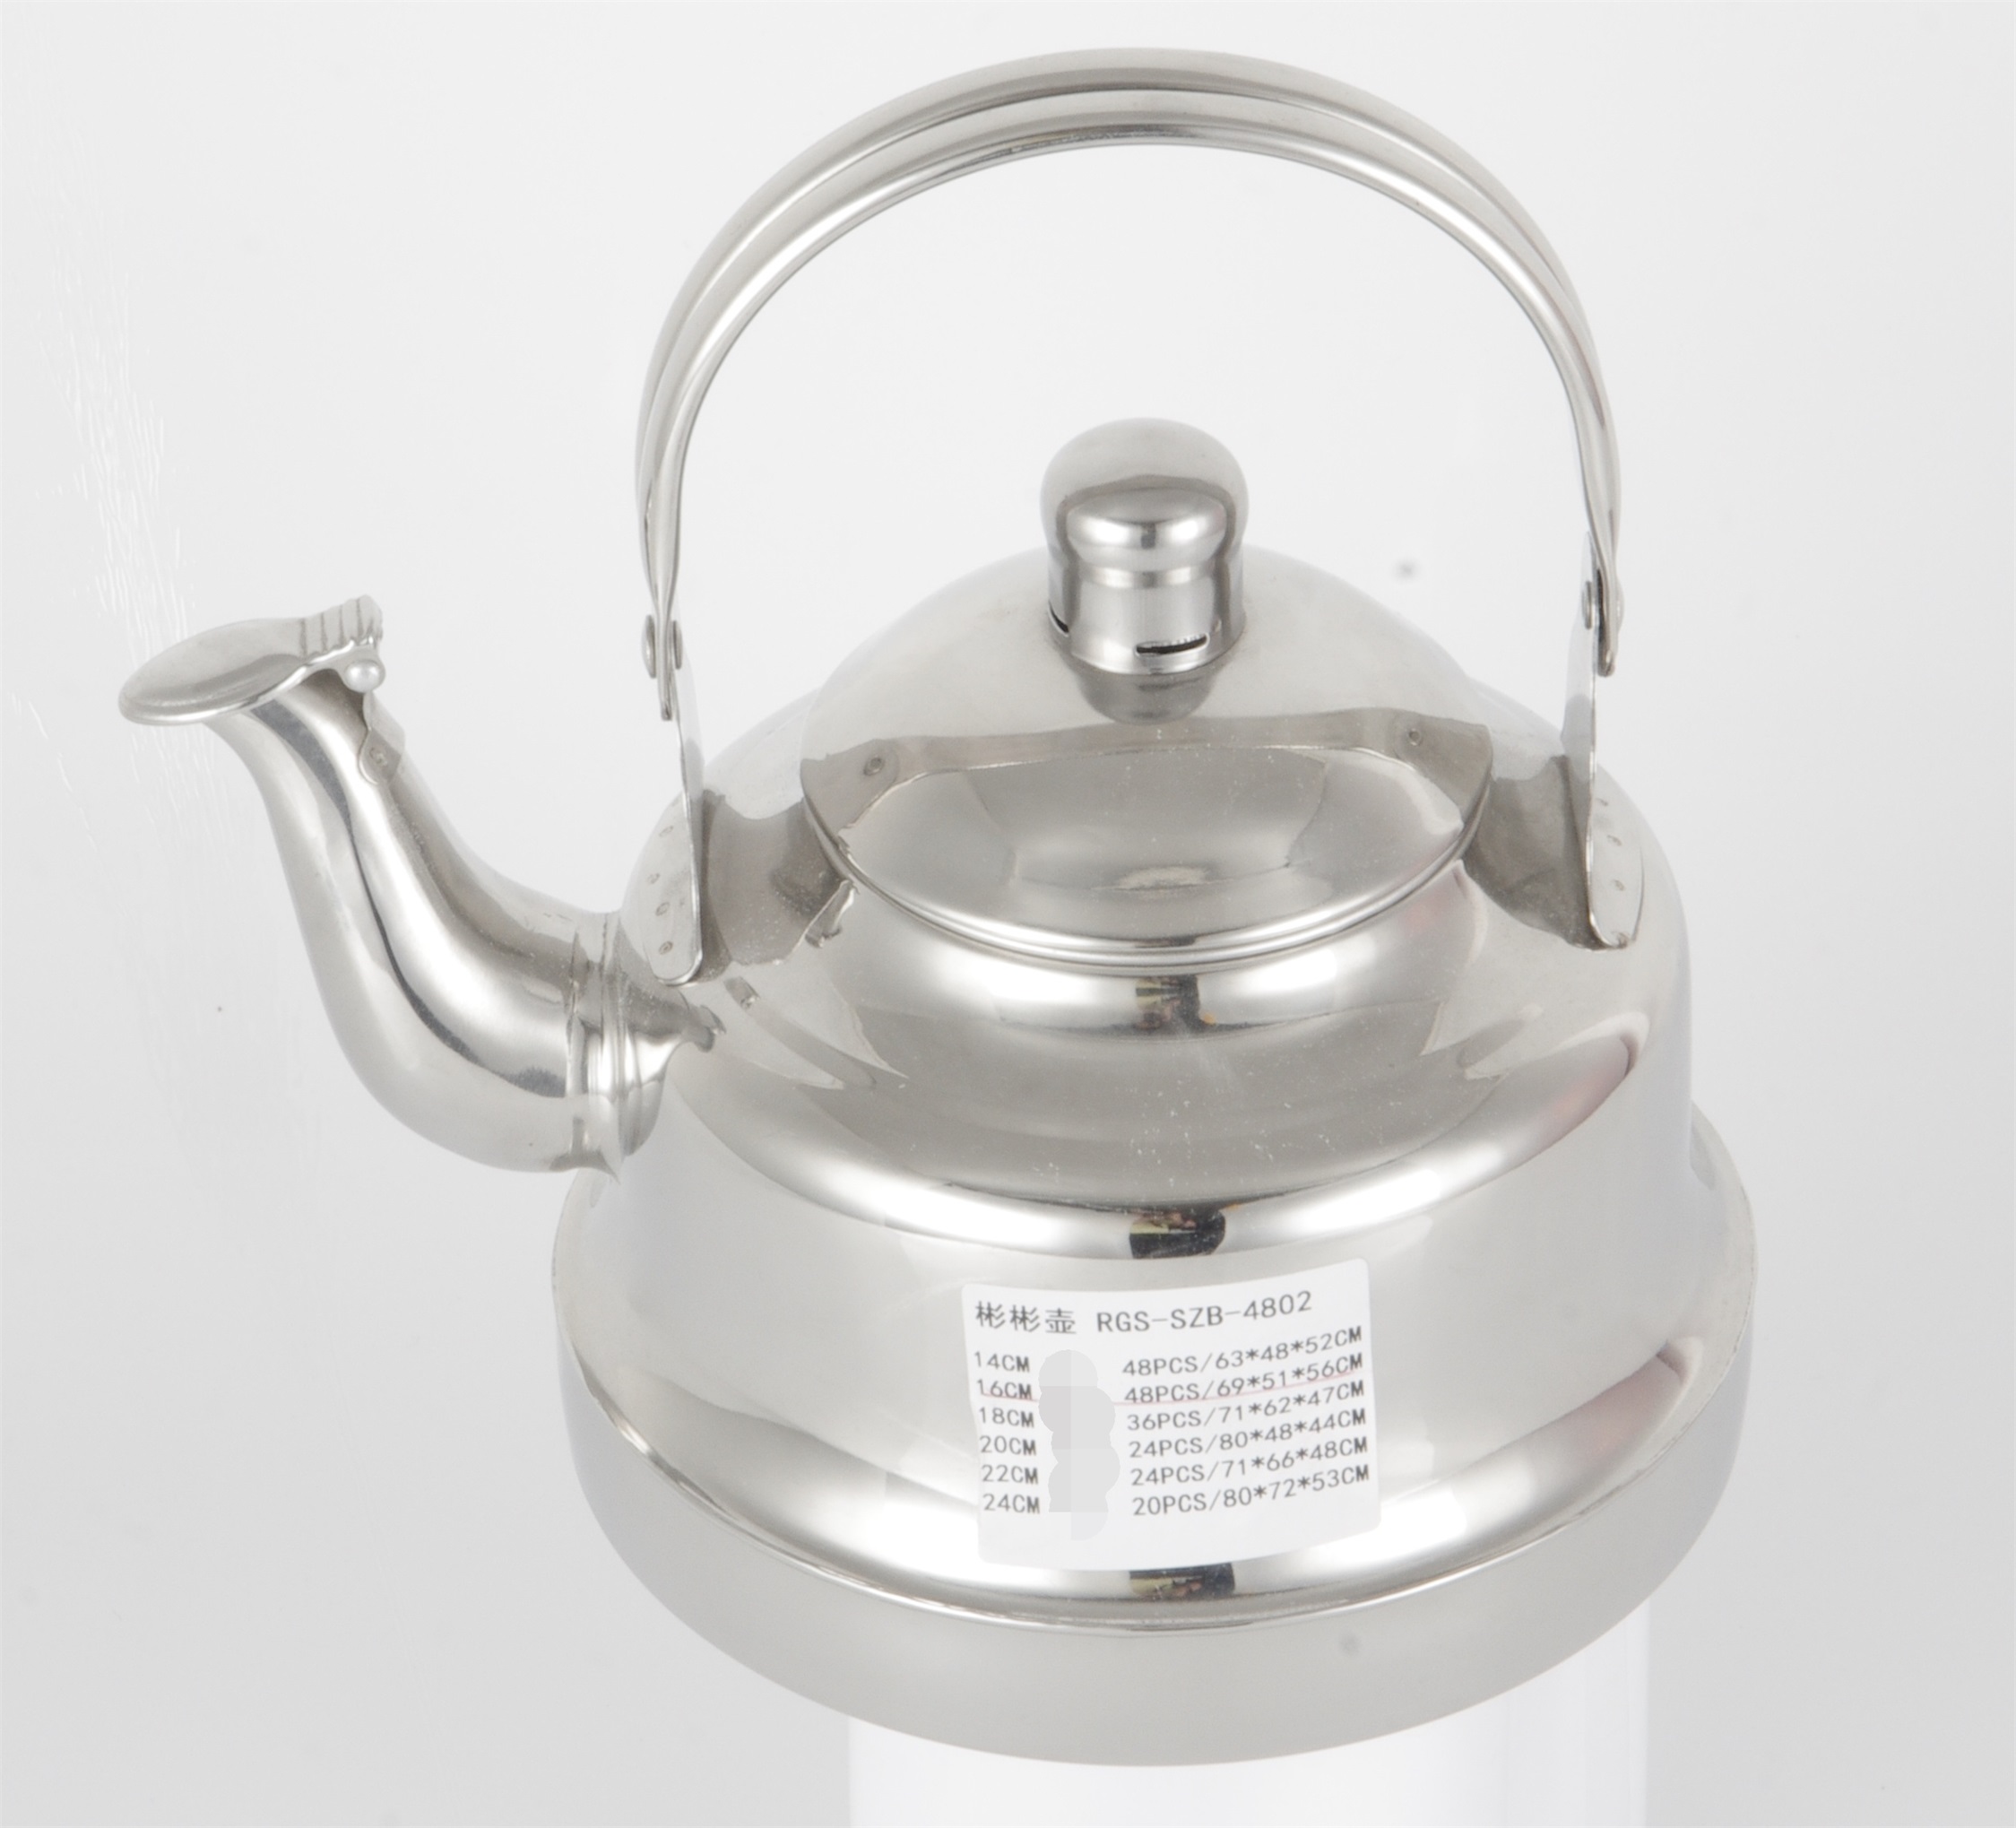 Evergreen traditional stainless steel kettle Suppliers for storage